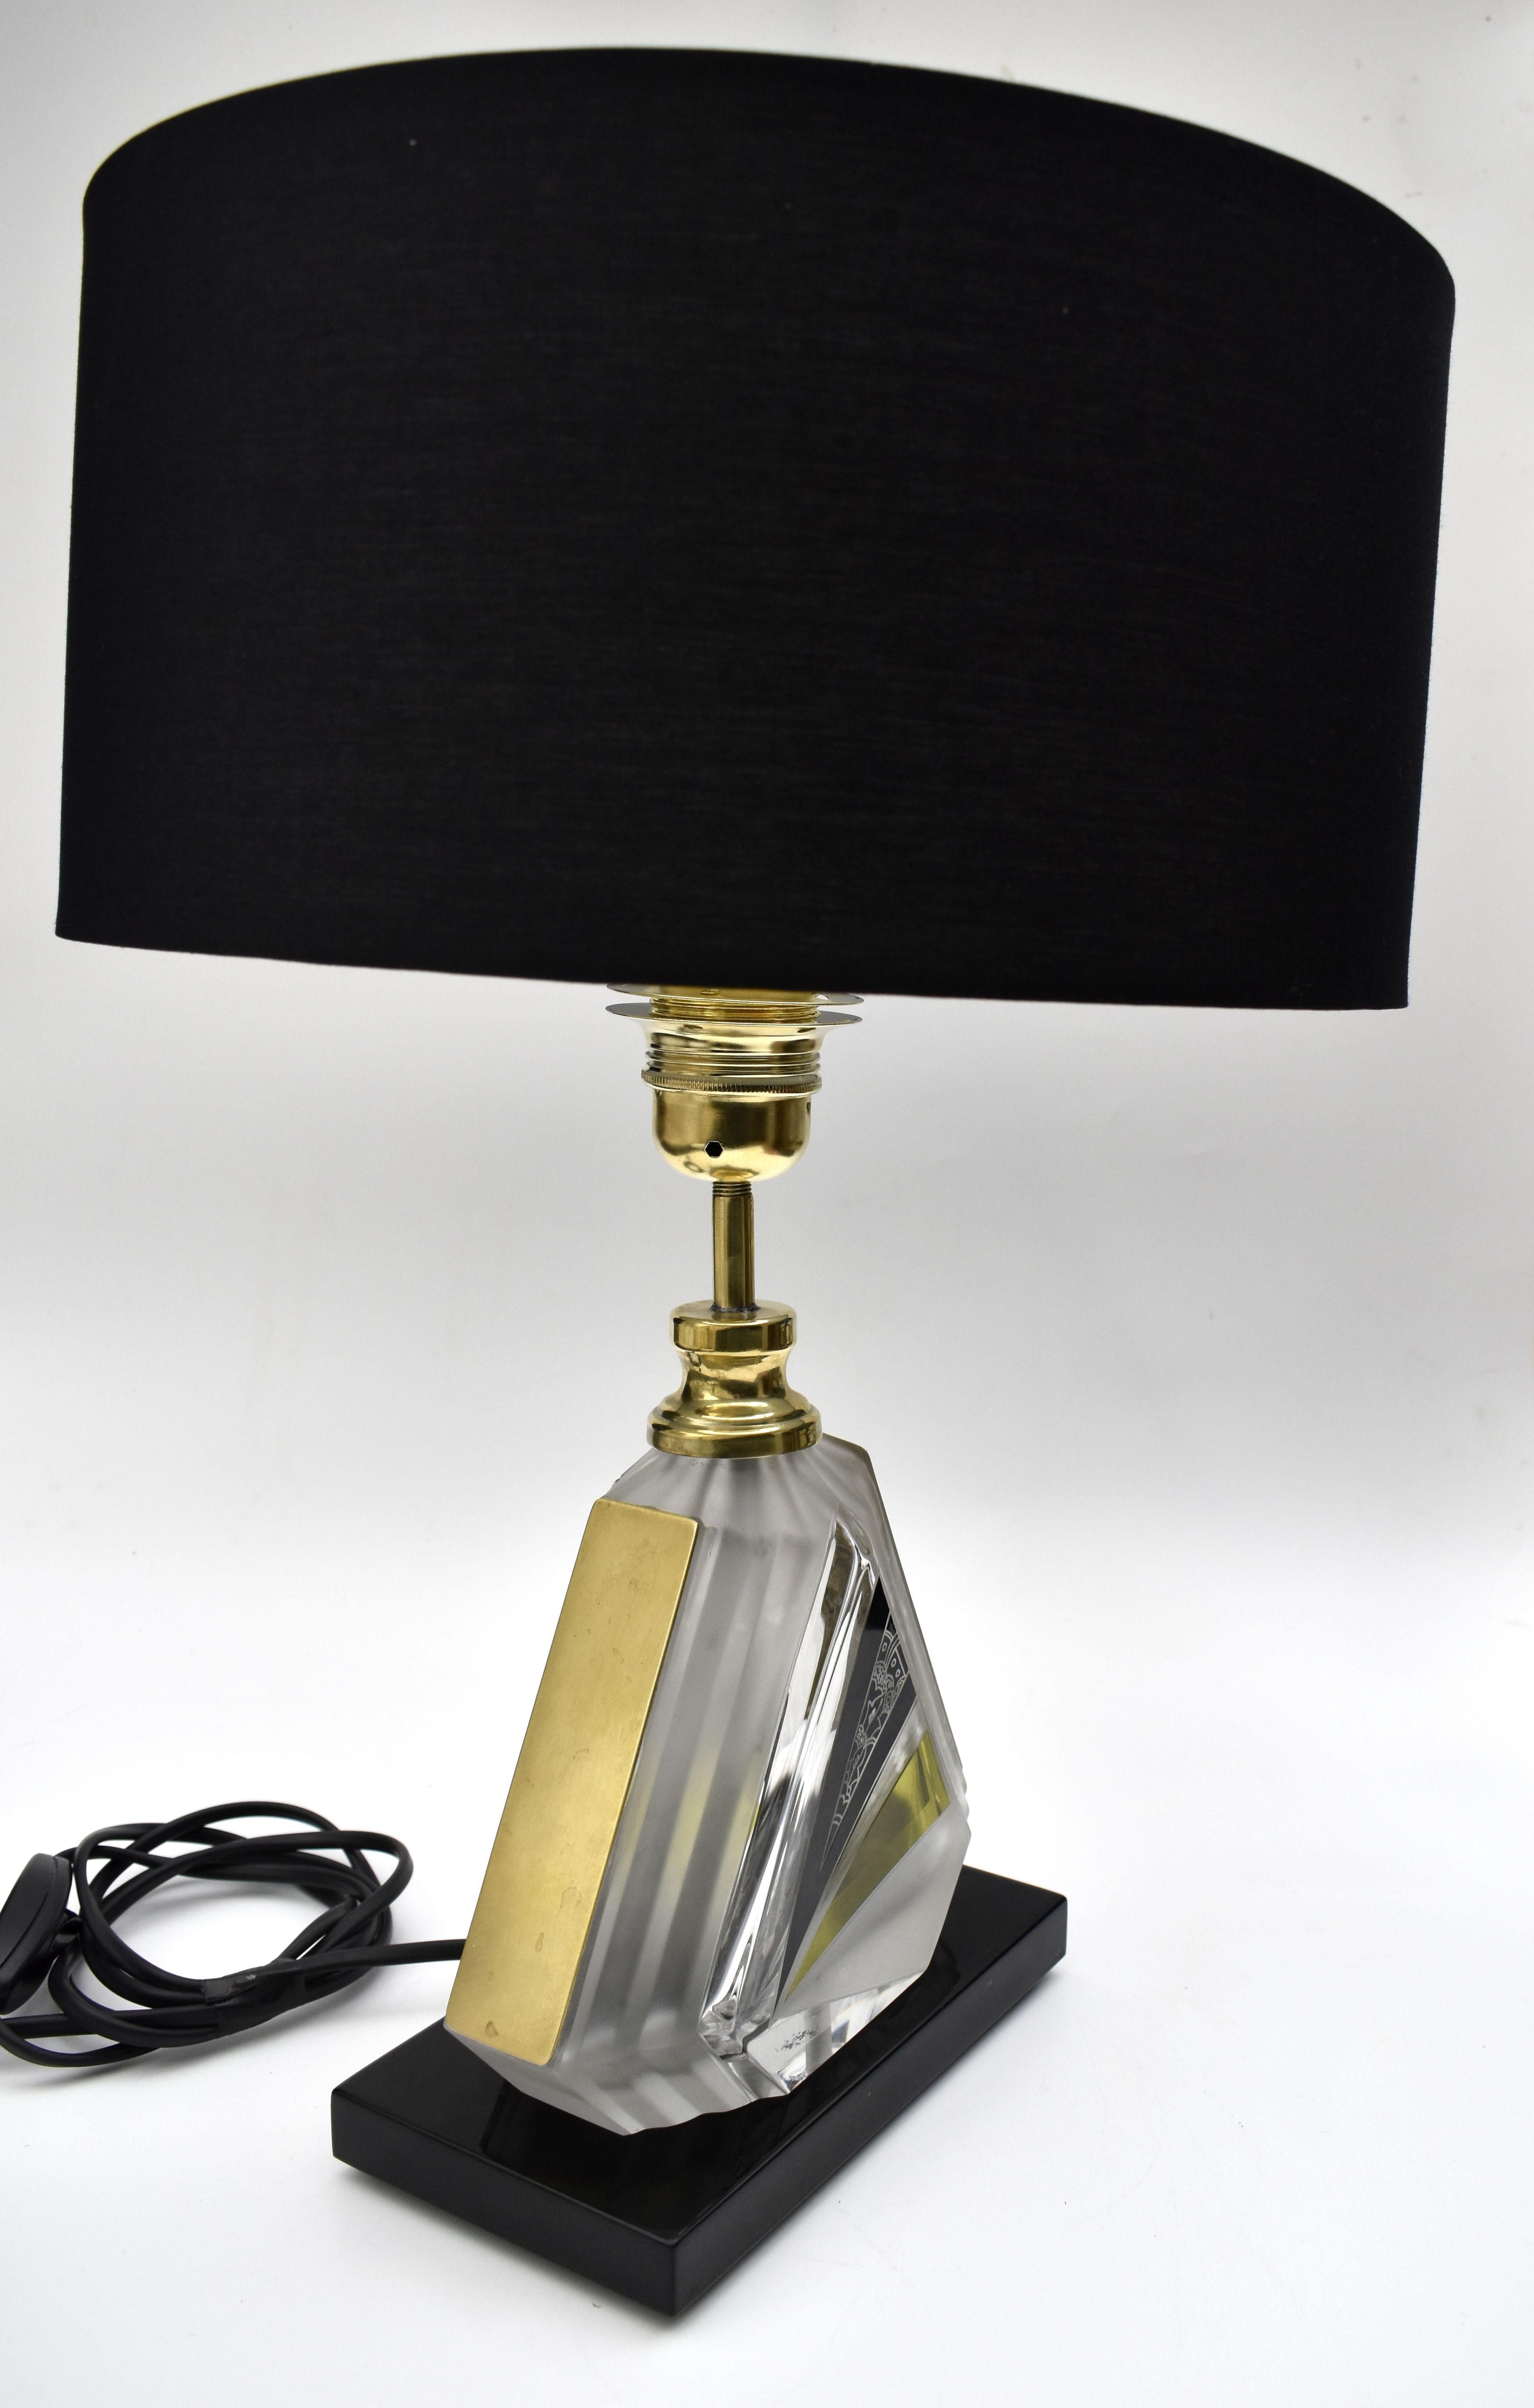 Brass Art Deco Iconic Glass Table Lamp By Karl Palda, c1930 For Sale